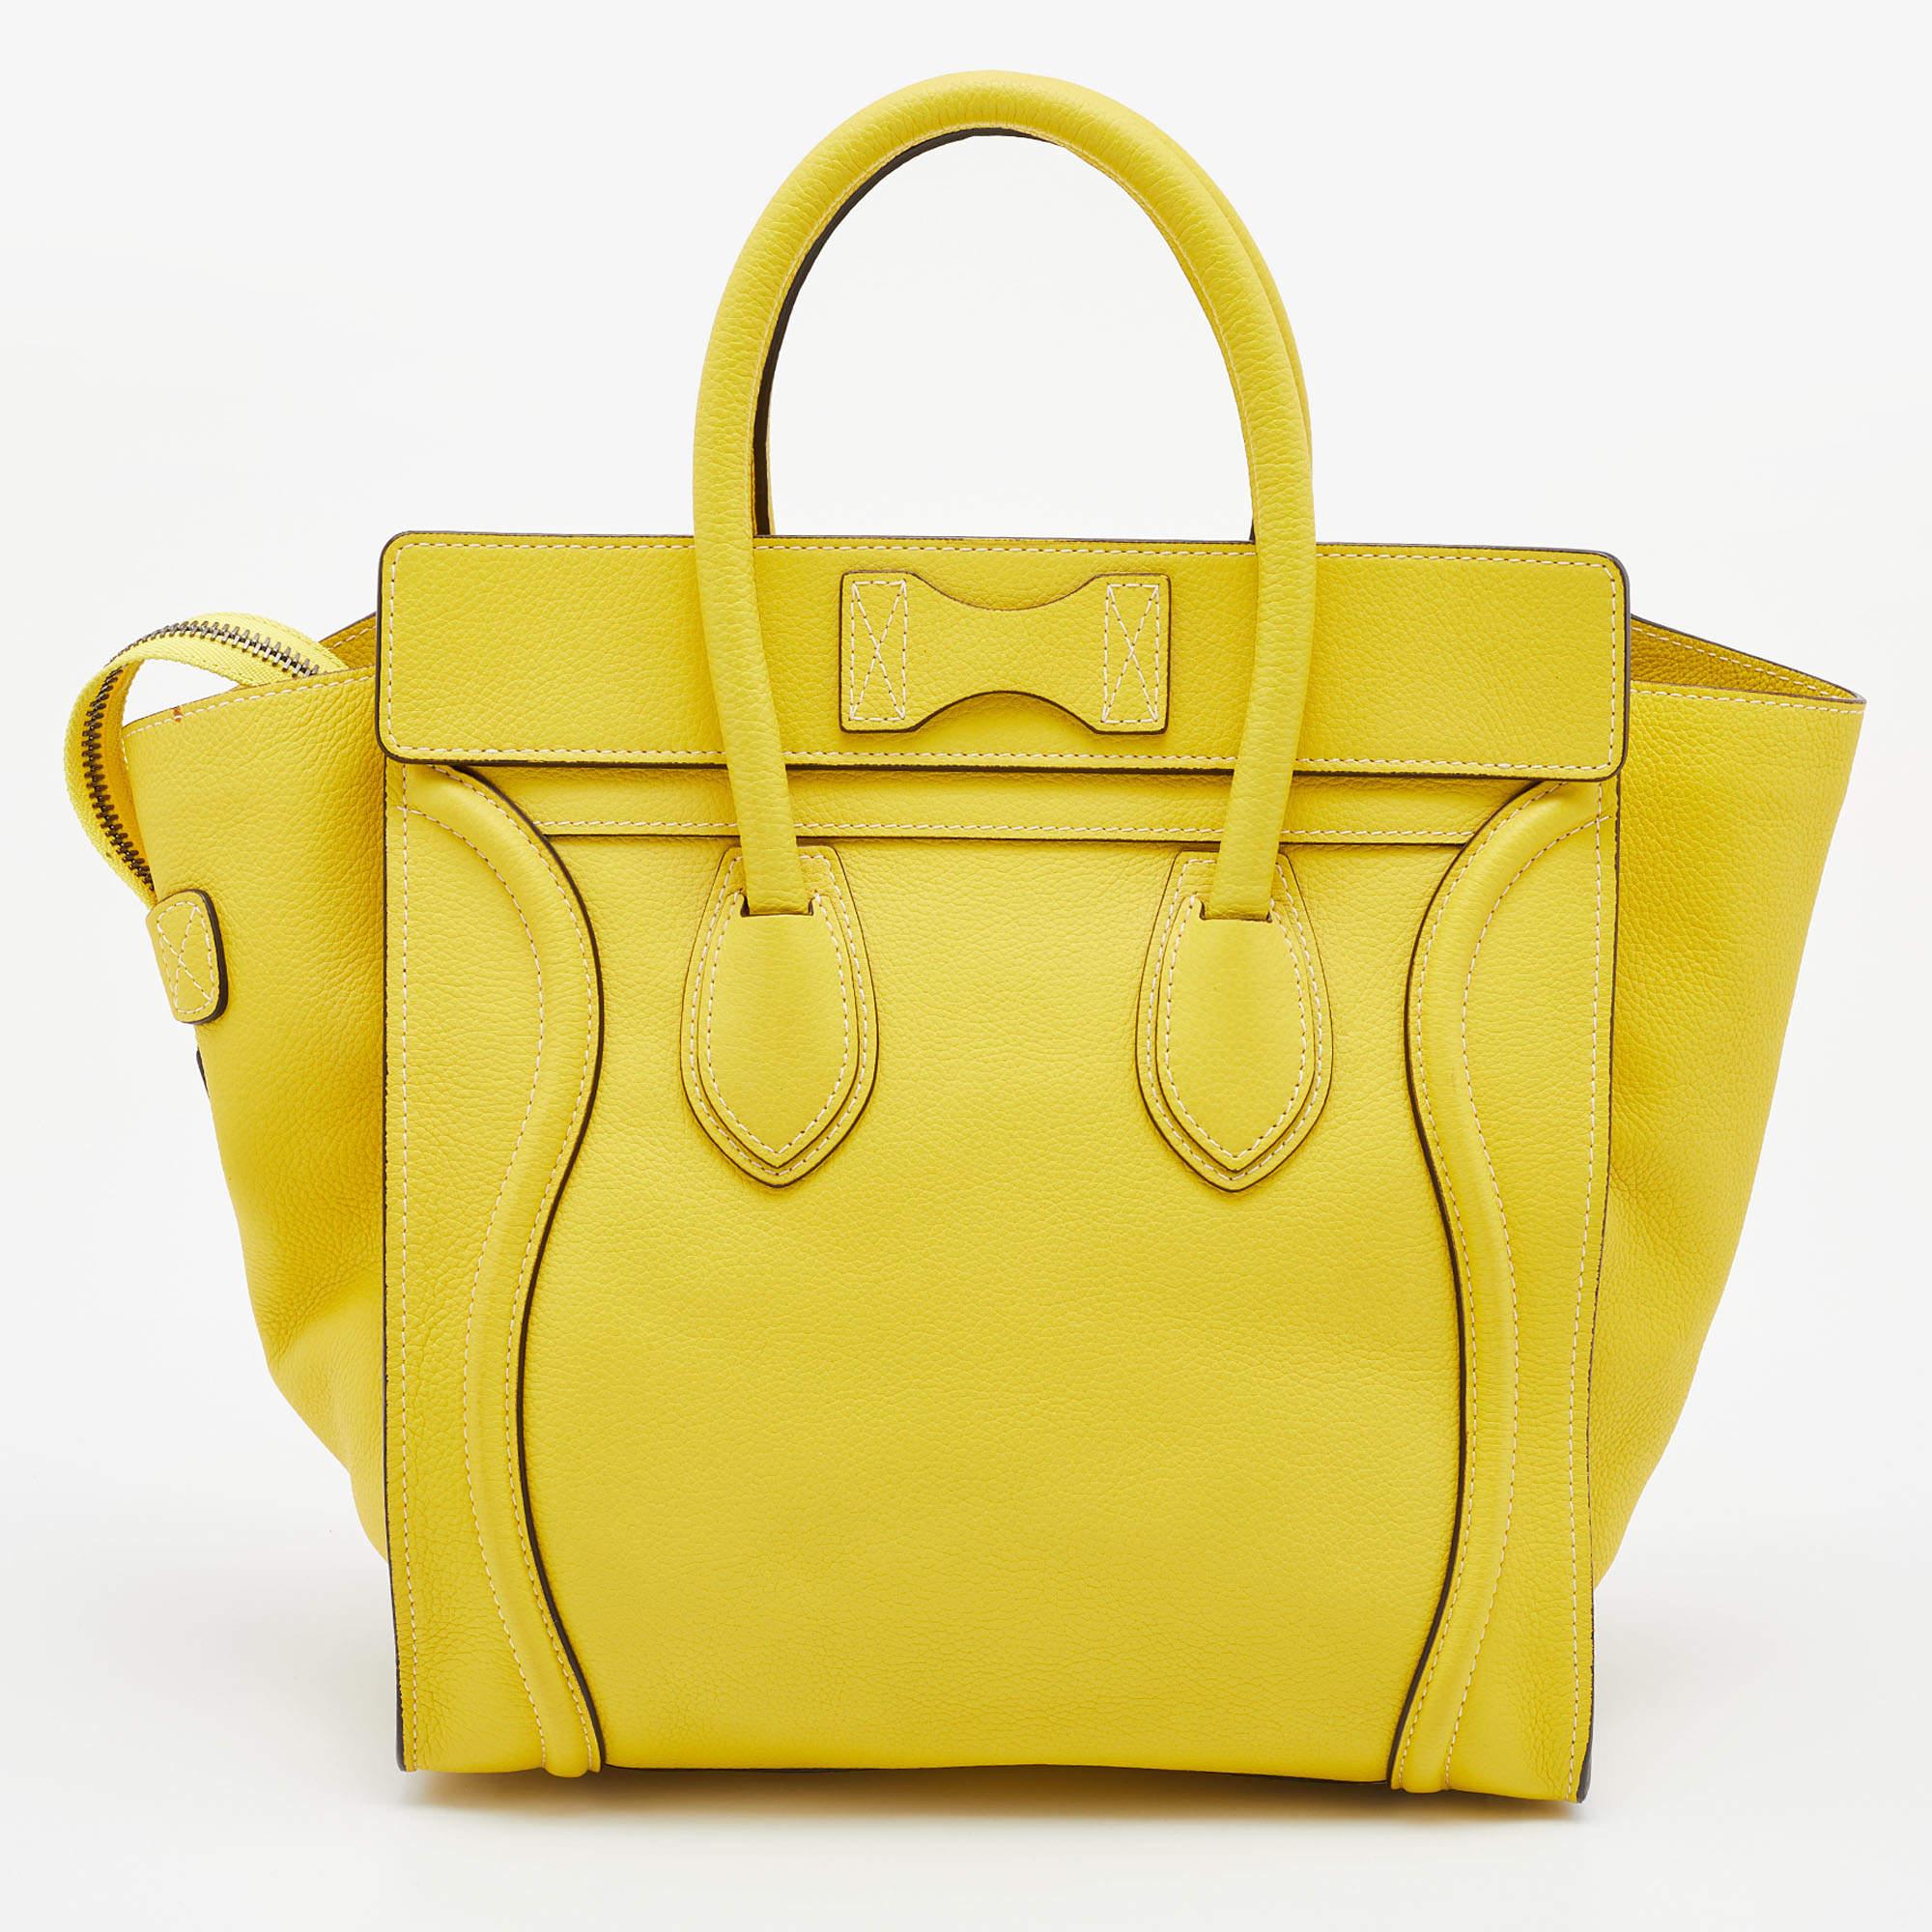 The mini Luggage tote from Celine is one of the most popular handbags in the world. This tote is crafted from leather and designed in a yellow shade. It comes with rolled top handles, protective metal feet, and a front zip pocket. The bag is